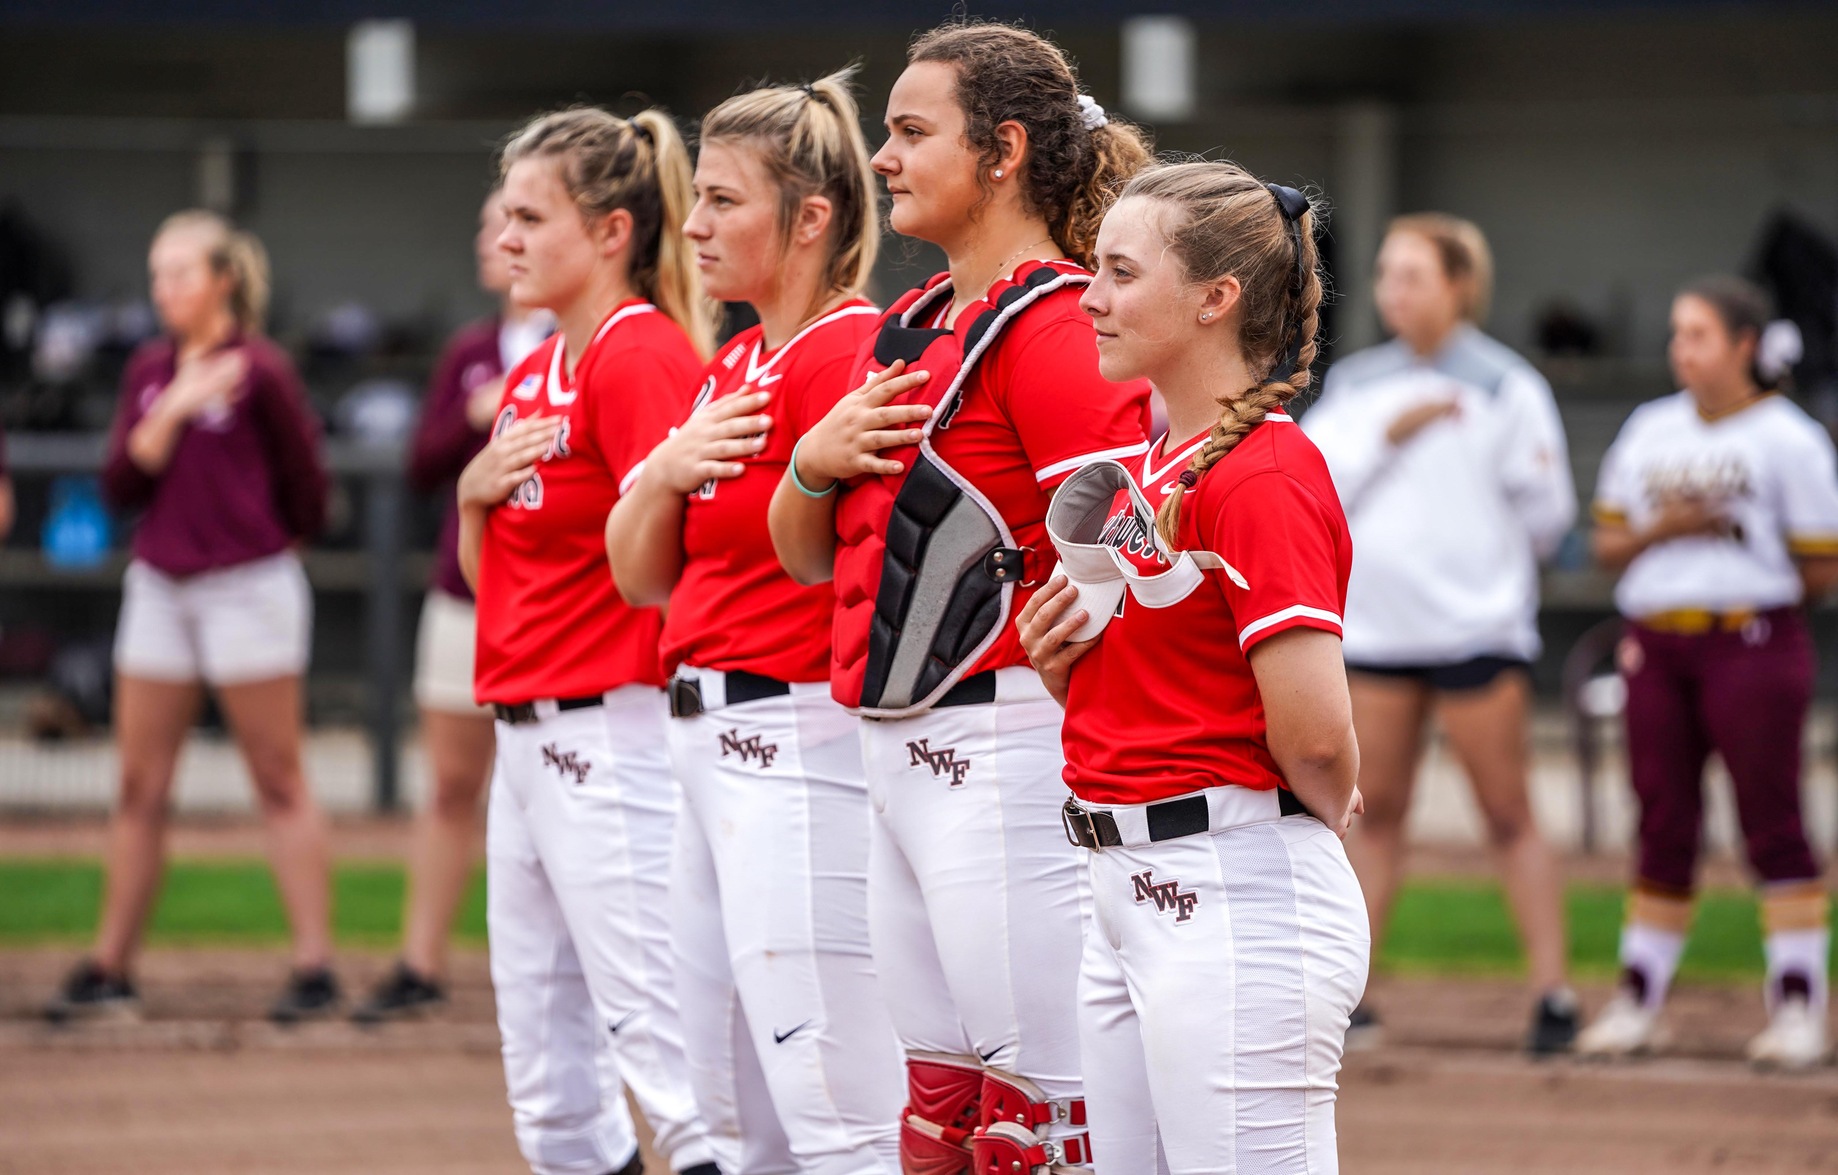 NWF Softball Travels for Pair of Friday Games